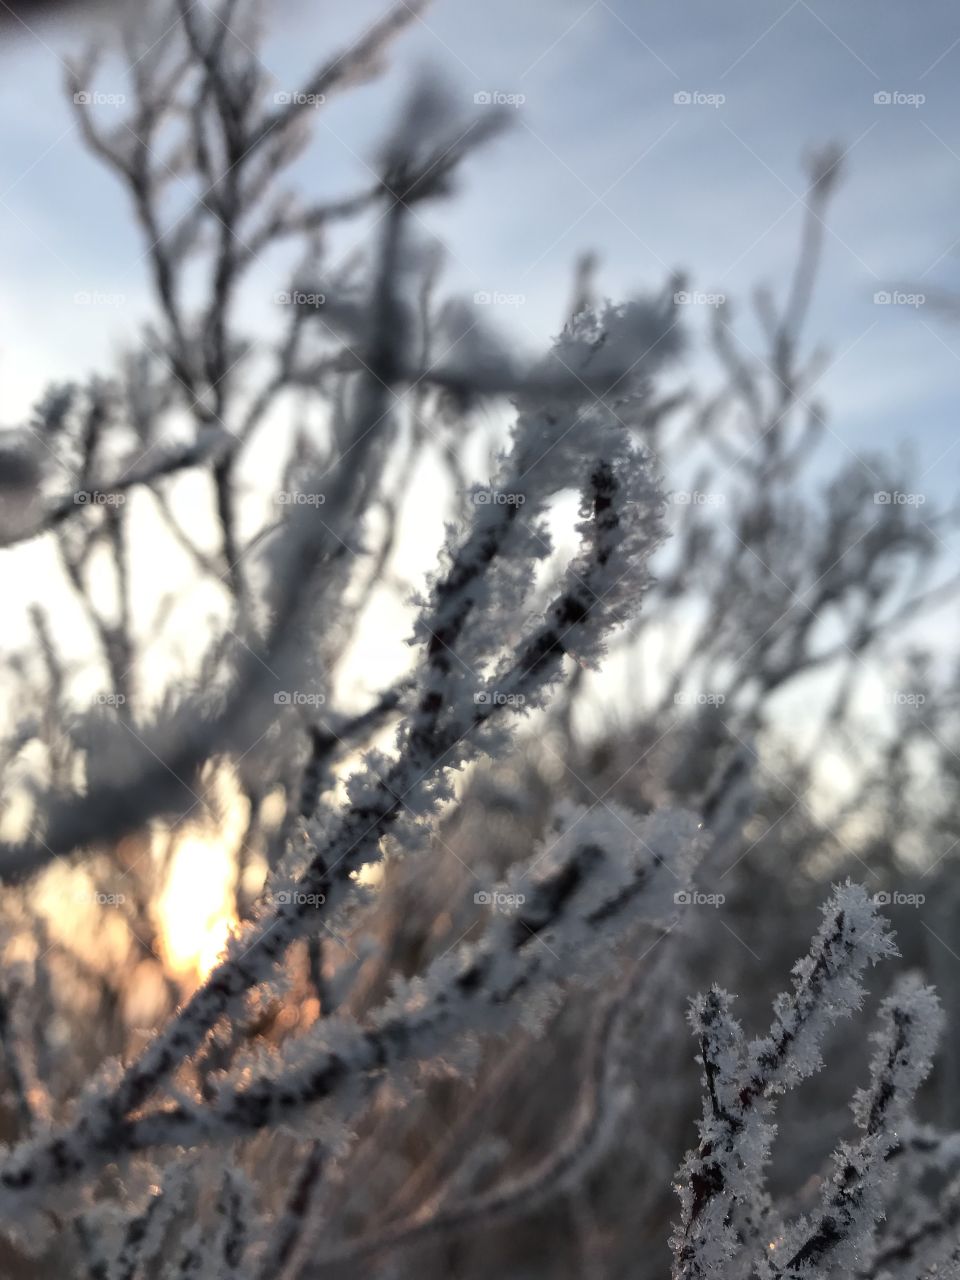 Frost 